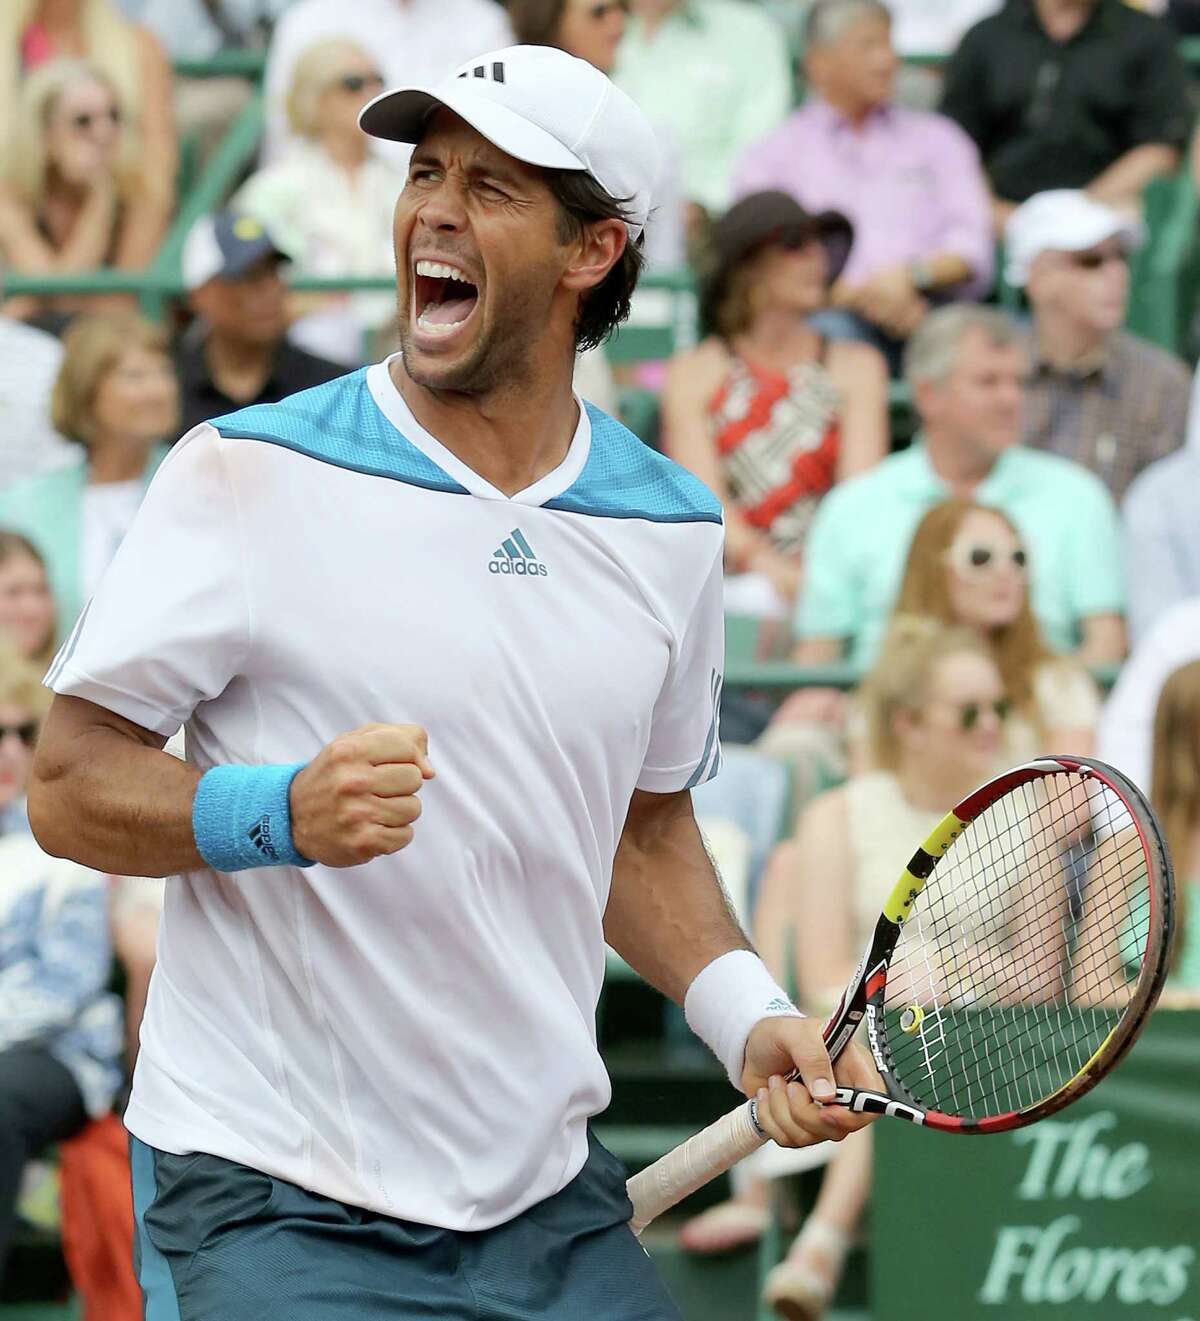 Fernando Verdasco (ESP) celebrates after defeating Nicolas Almagro (ESP) ) 6-3, 76 in the singles finals on April 13, 2014 at the U.S. Men's Clay Court Championship at River Oaks in Houston, TX. .